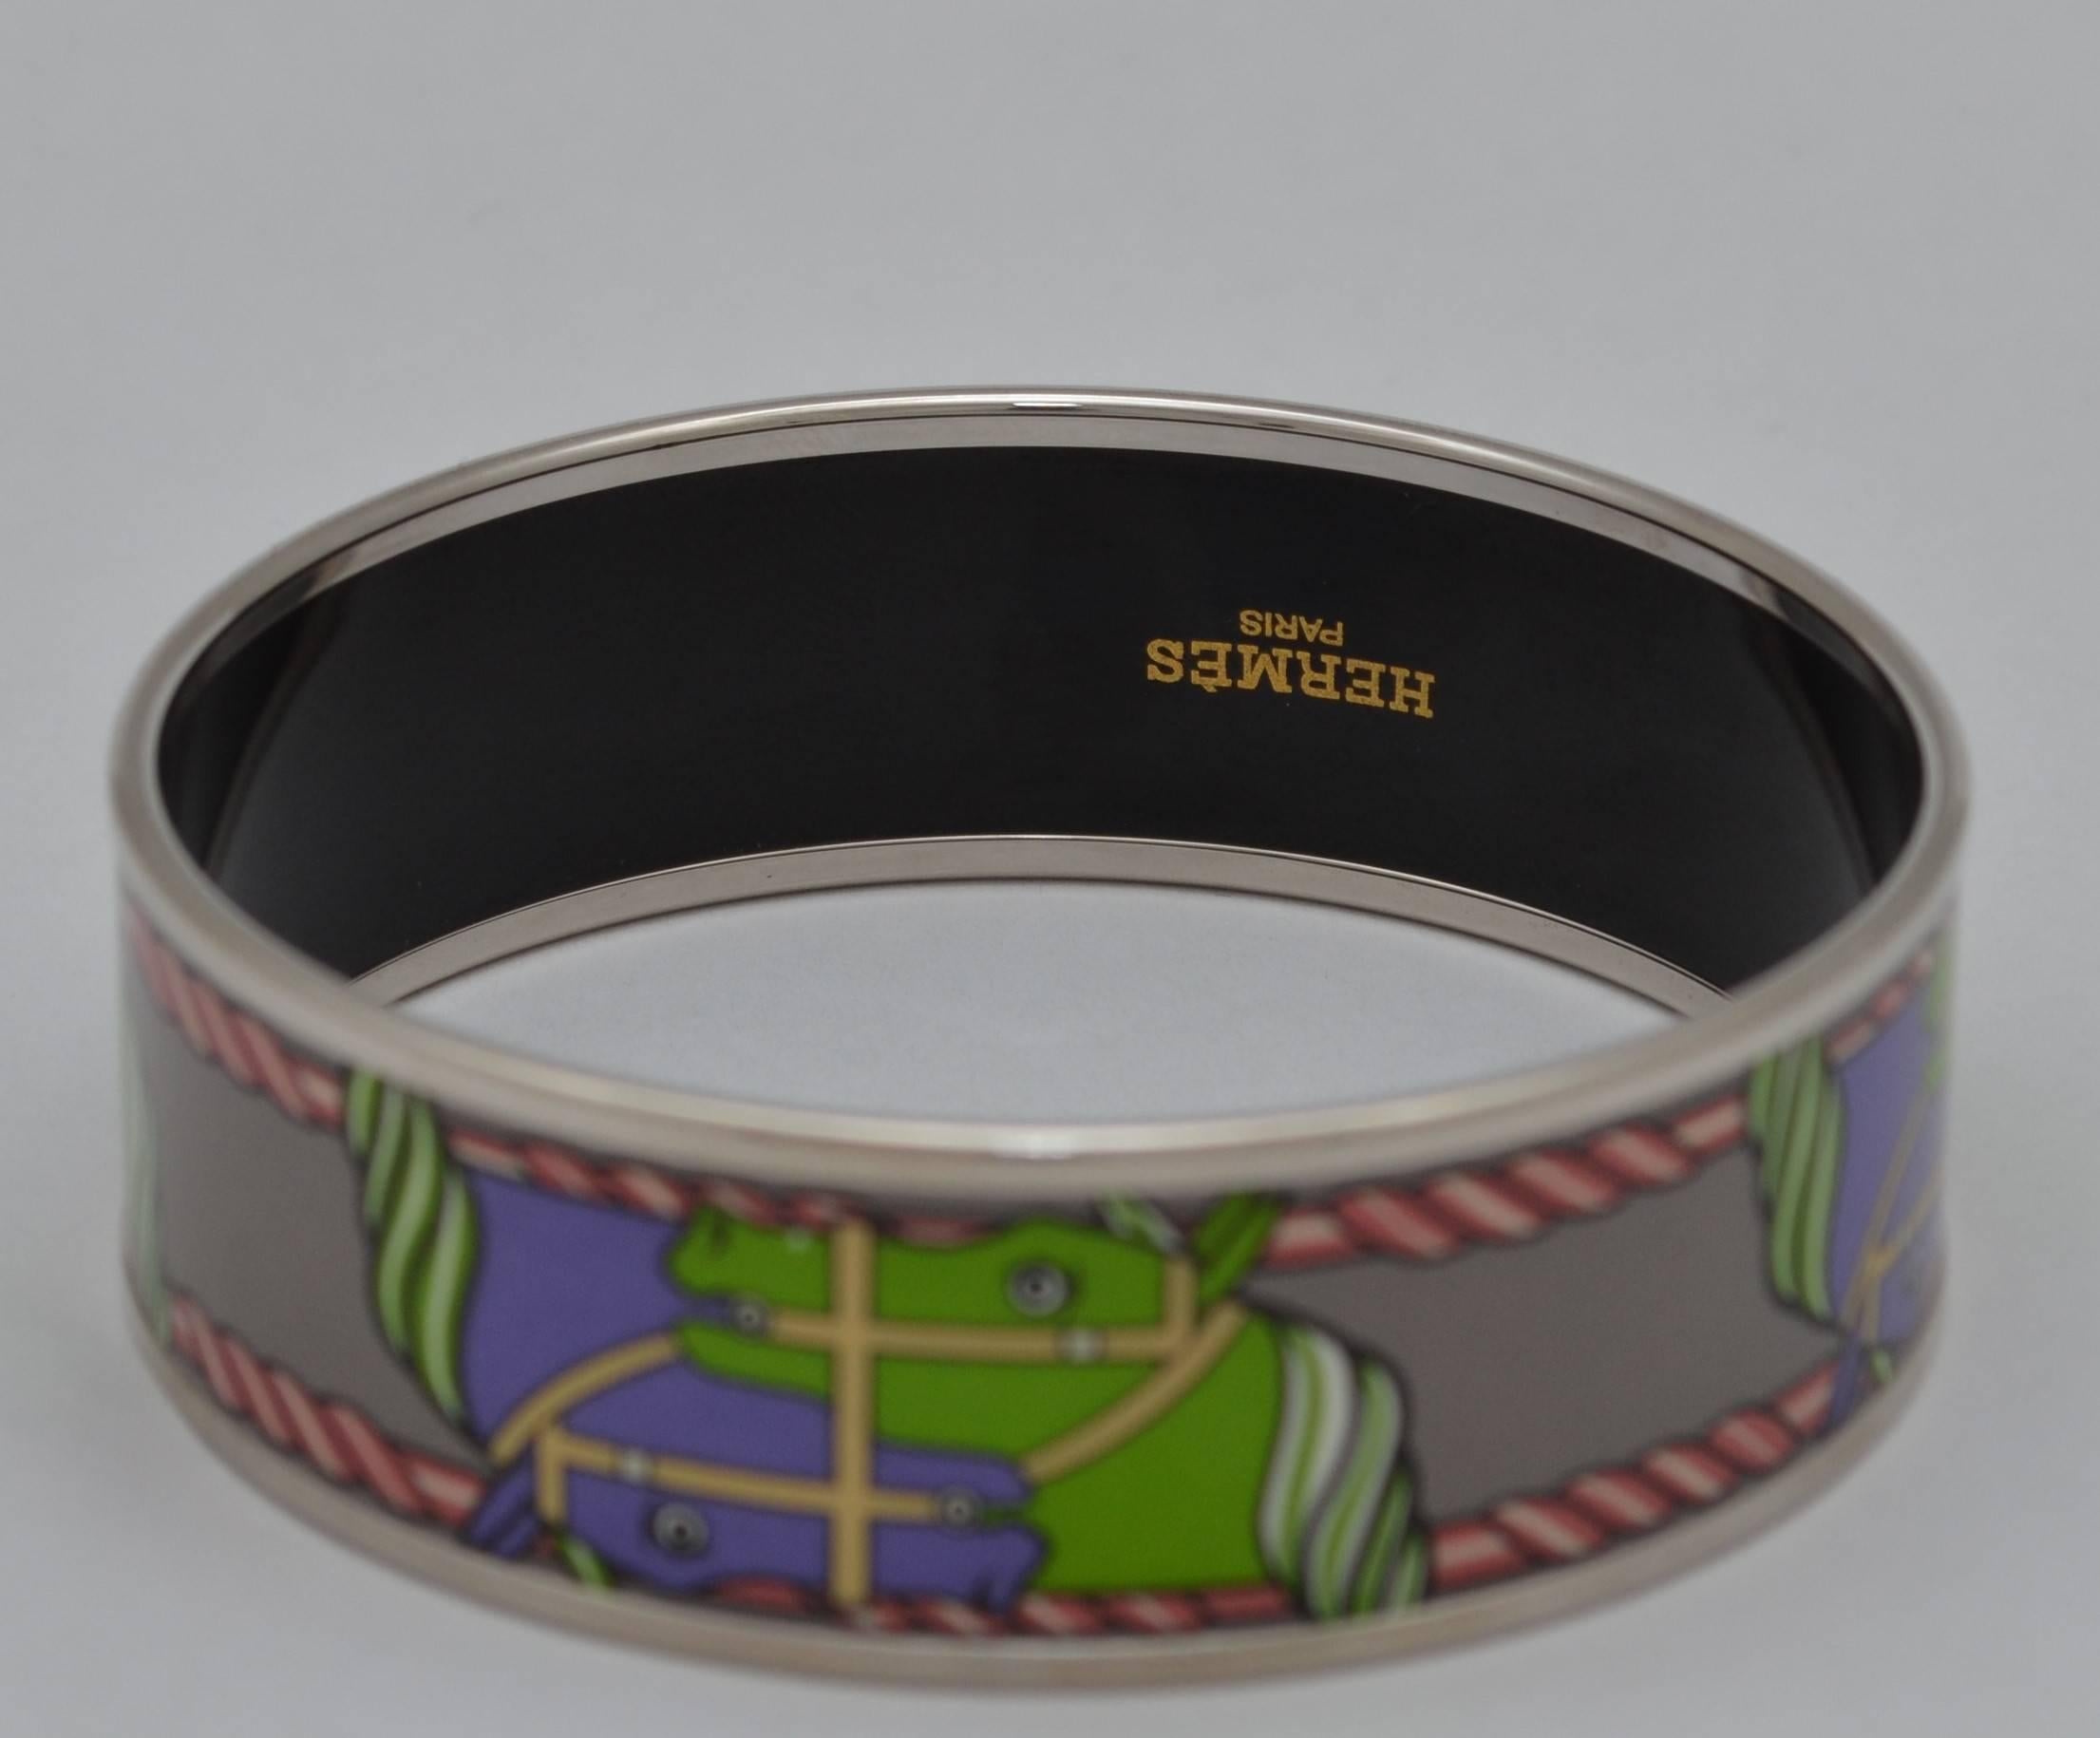 Hermes Paris Palladium Silver Multicolor Equestrian Horse Print Enamel Bangle Bracelet Small Size 62

Hermes Paris bangle featured in a silver-tone metal and an equestrian print throughout with purple, green, pink, and grey tones. Made in France.